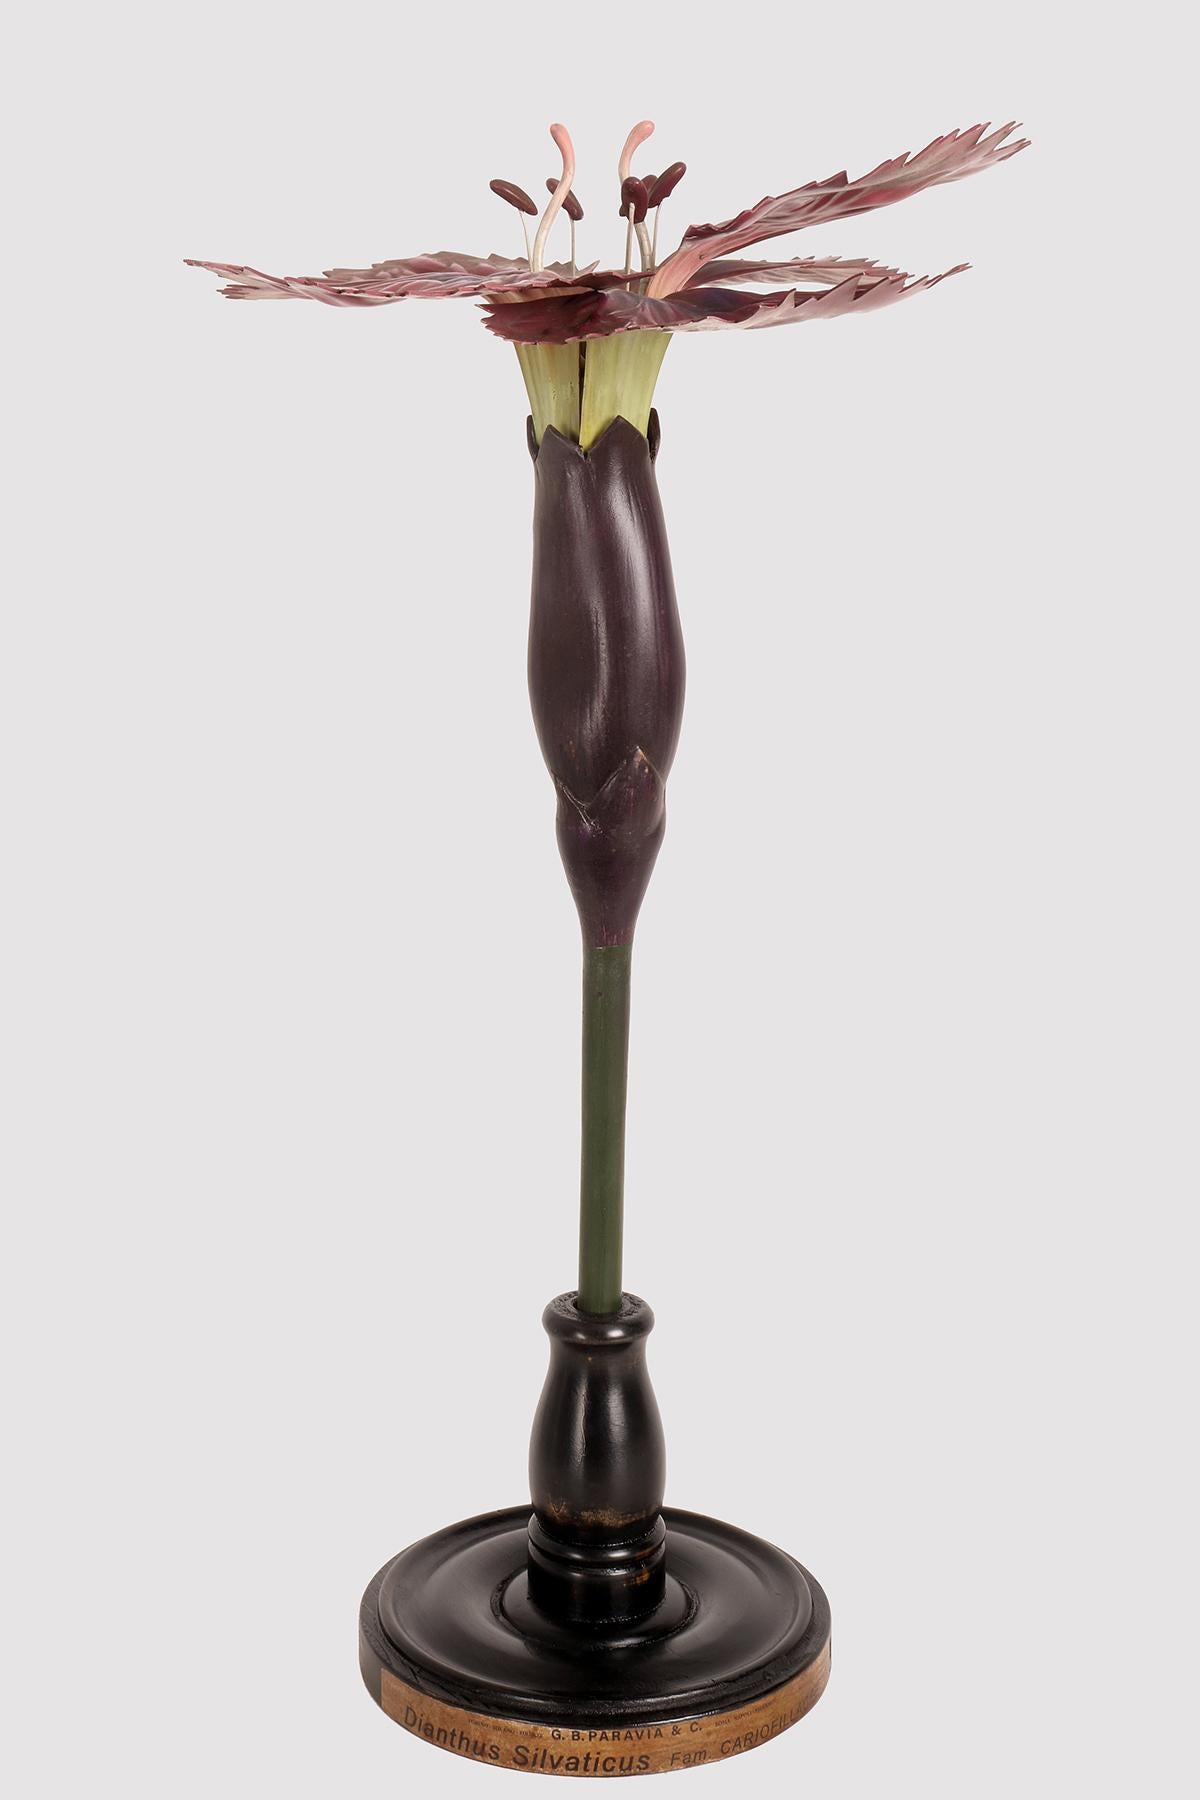 A botanical maquette for didactic use, depicting a Carnation flower, Dianthus Silvaticus, Cariofillacee. Made of metal, paper, plaster, galalith and wood. Extremely detailed. Paravia, Milan, Italy, circa 1940.